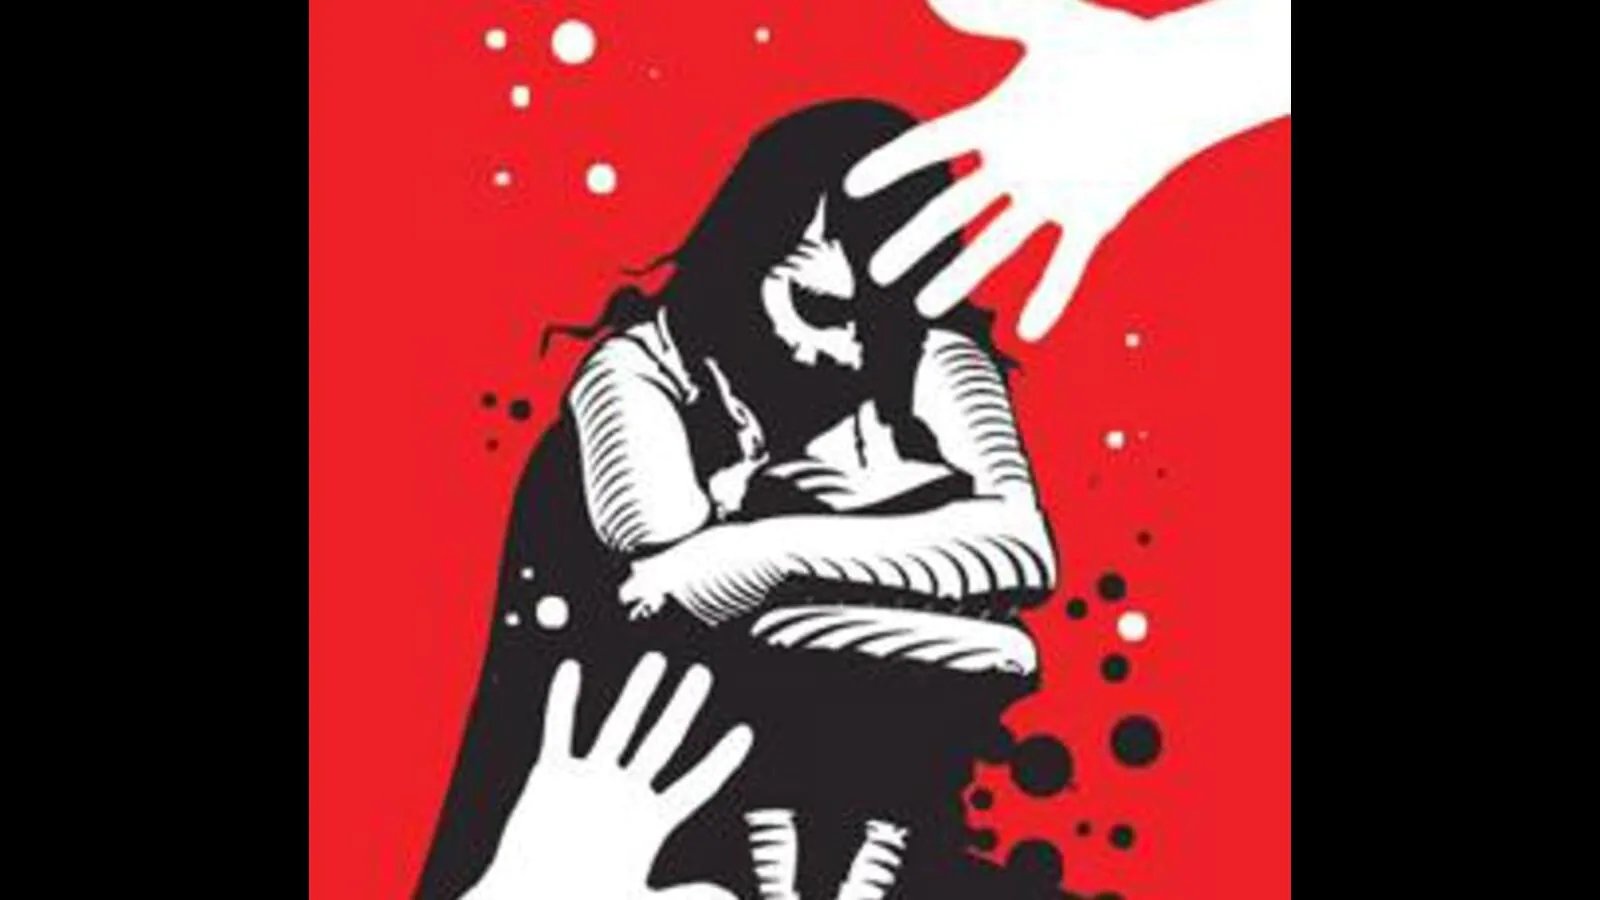 Ludhiana | Labourer rapes 8-year-old daughter, arrested